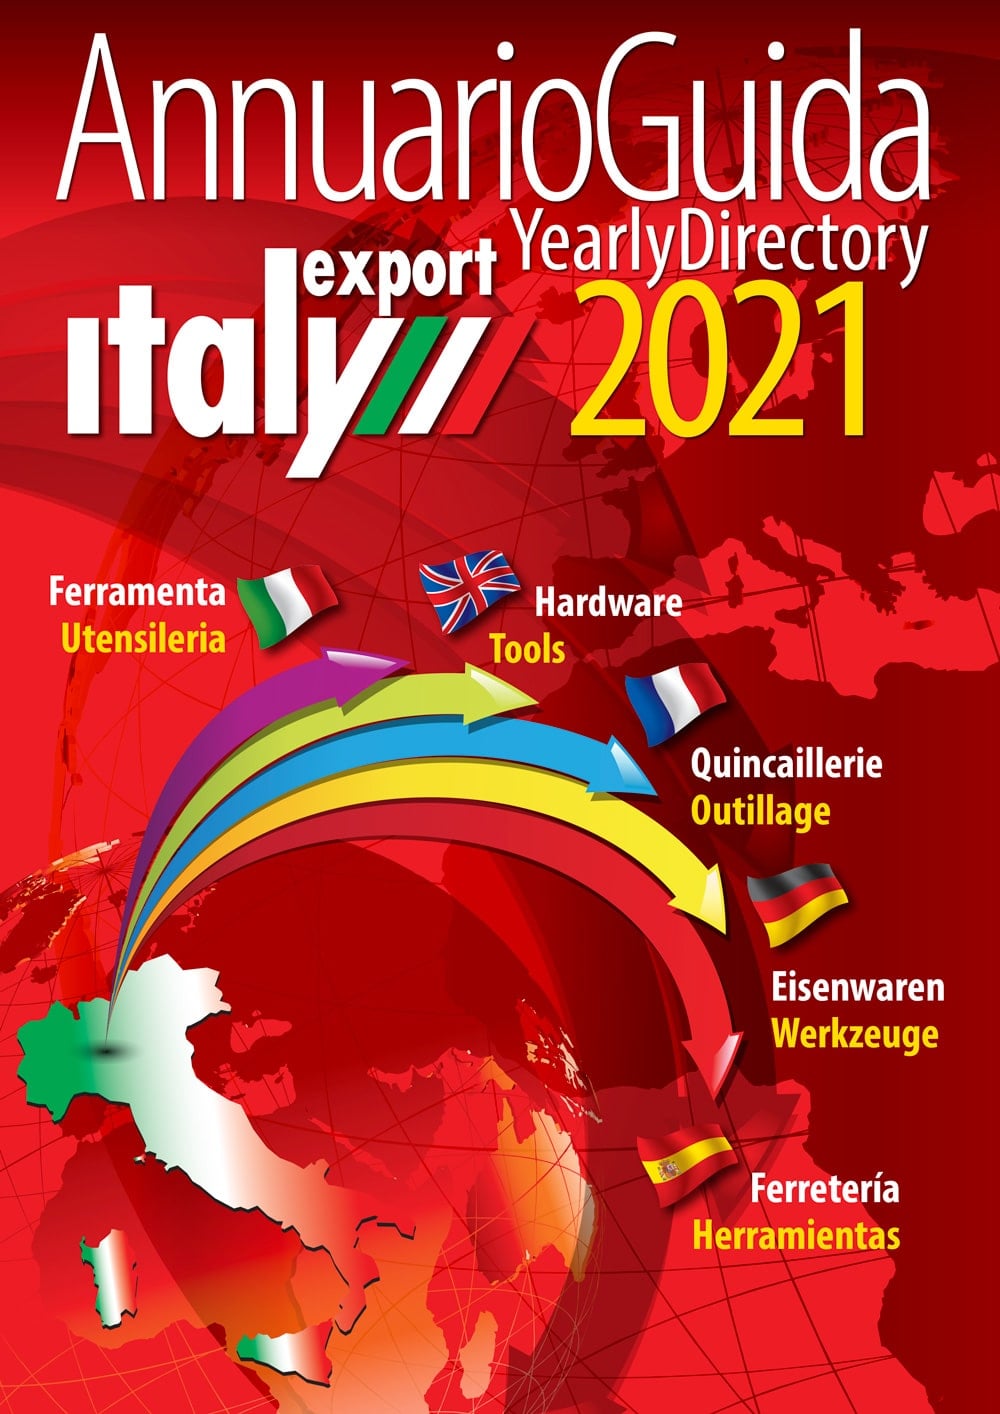 Yearly Directory 2021, Italy Export